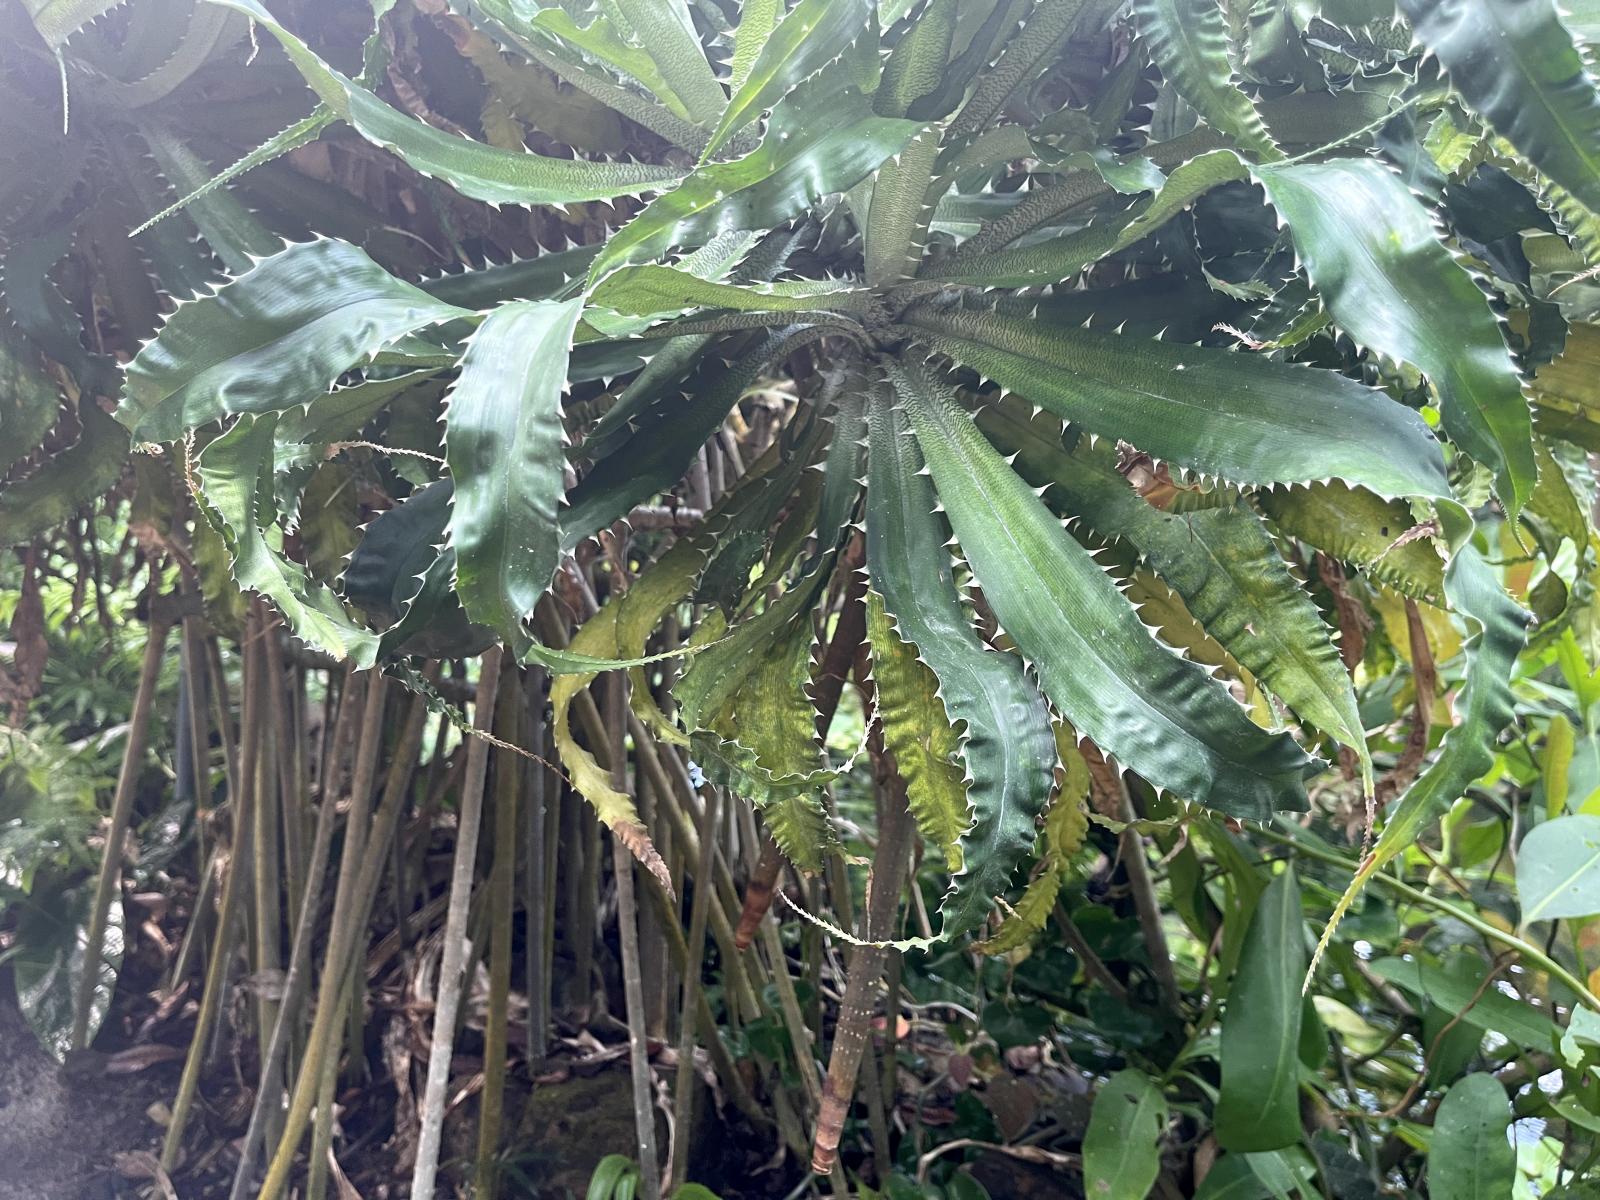 Plant with long overlapping dark green leaves with spine-like growths on the edges. The plant has stick-like roots connecting the leaves to the soil.